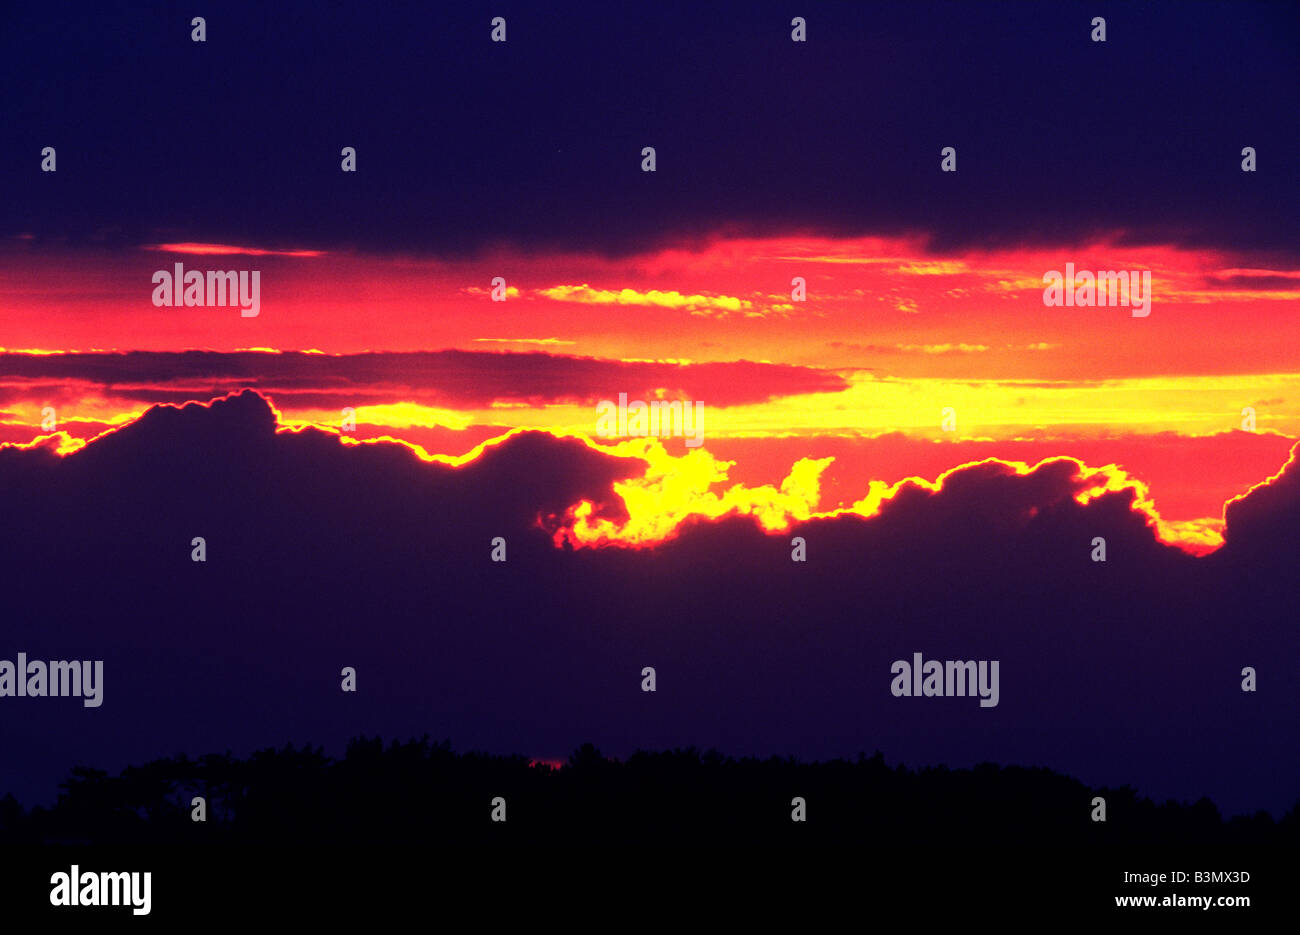 Clouds red sky sunset silhouette trees winter skyline weather prediction shepherds delight Stock Photo